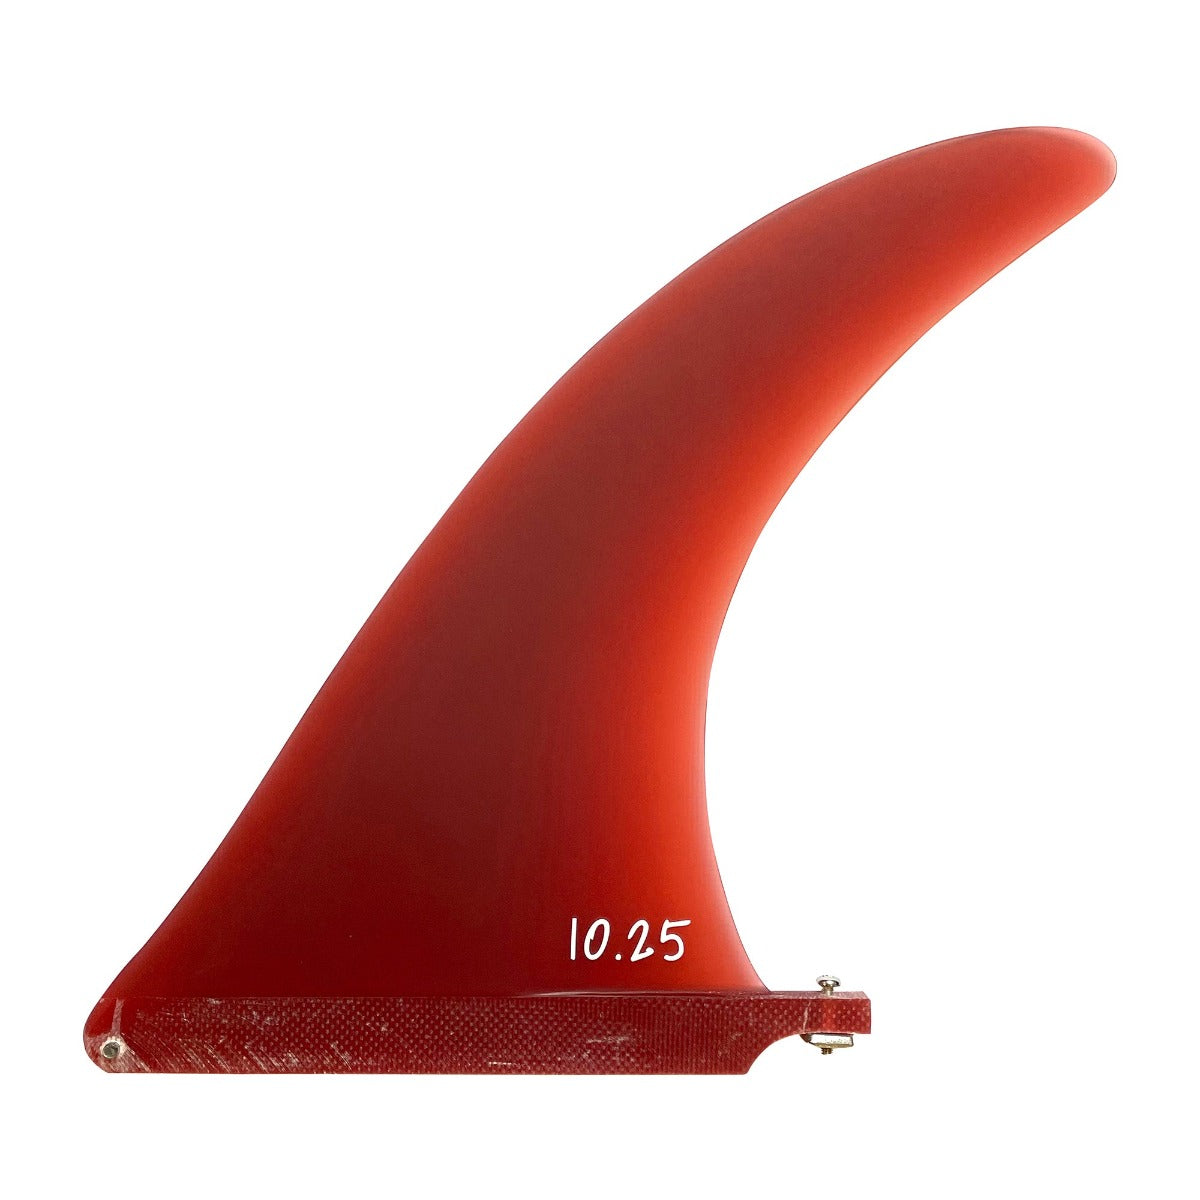 surf-system-red-6-5-longboard-surfboard-fin-screw-and-plate-fibreglass